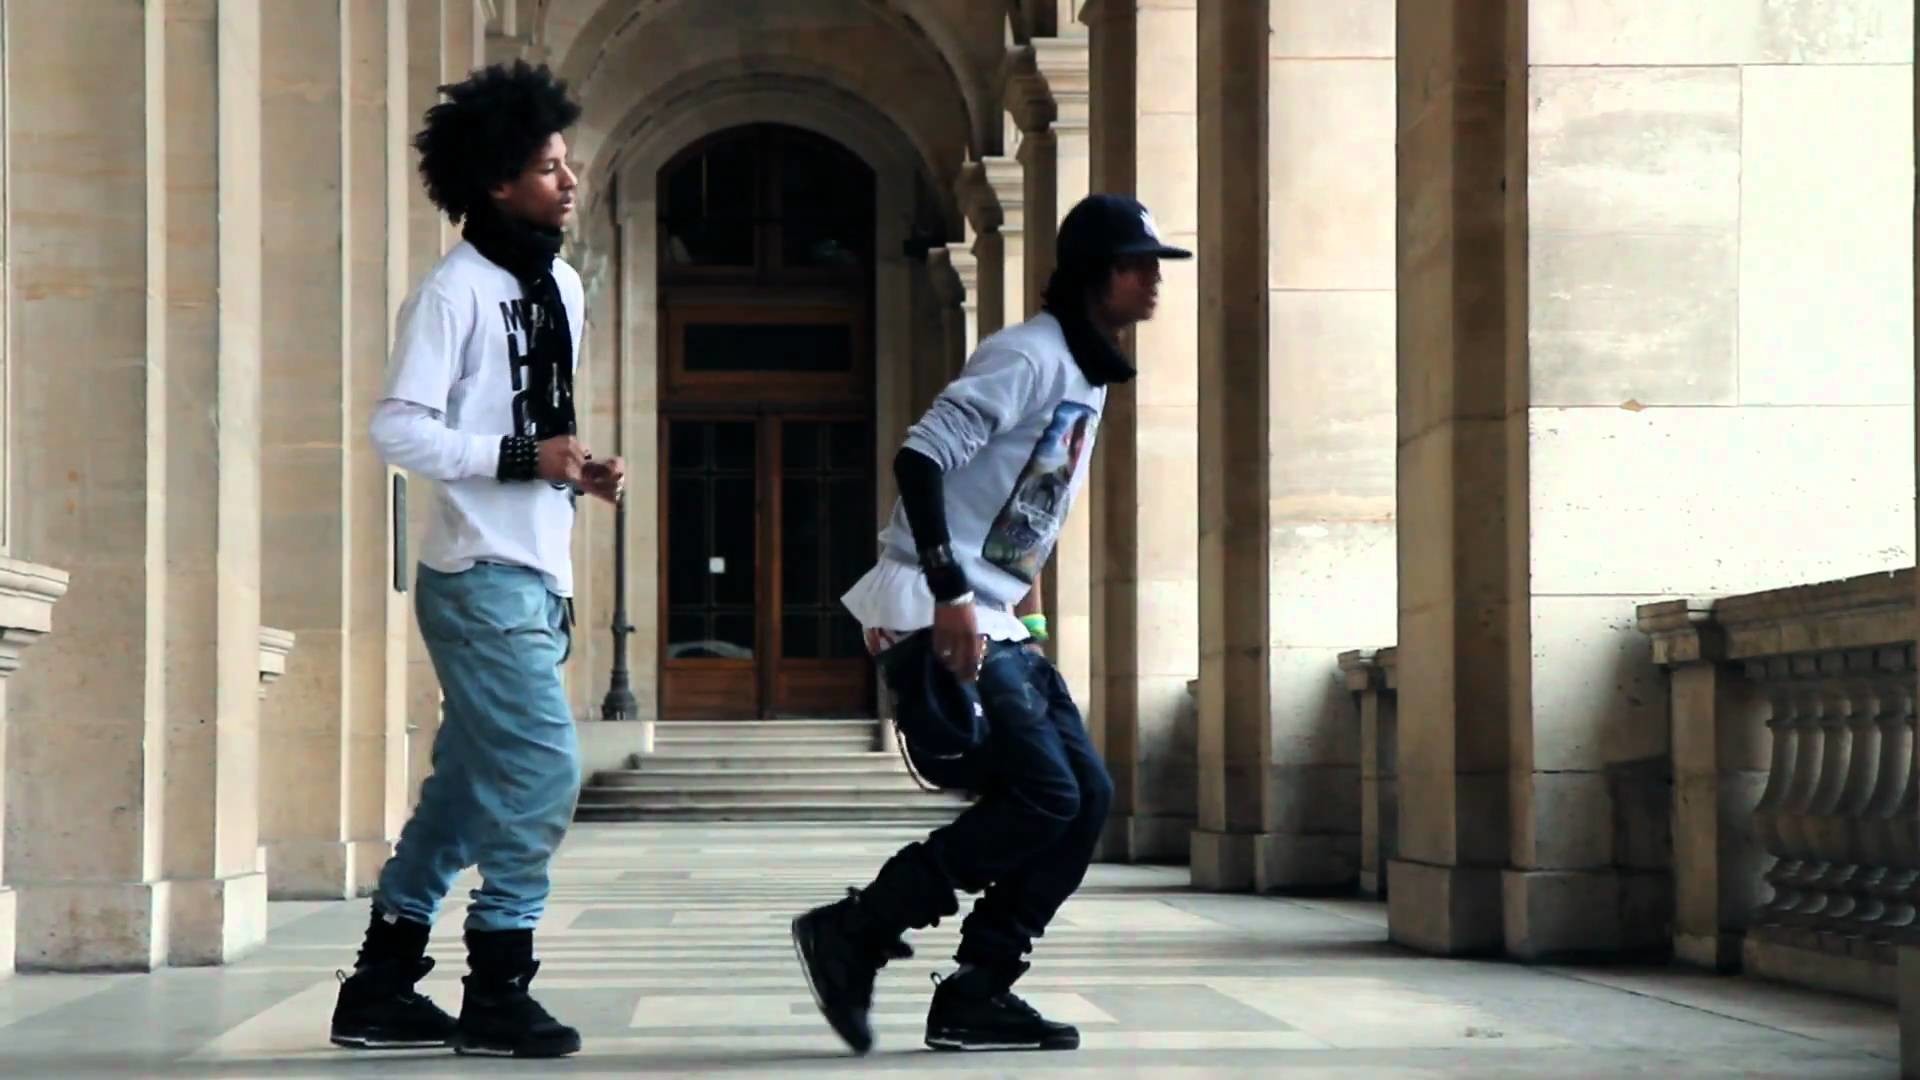 1920x1080 Ca Blaze & Lil' Beast (Les Twins) New Style Tutorial Part 4/4 | NEW STYLE  HIP HOP in Paris - YouTube